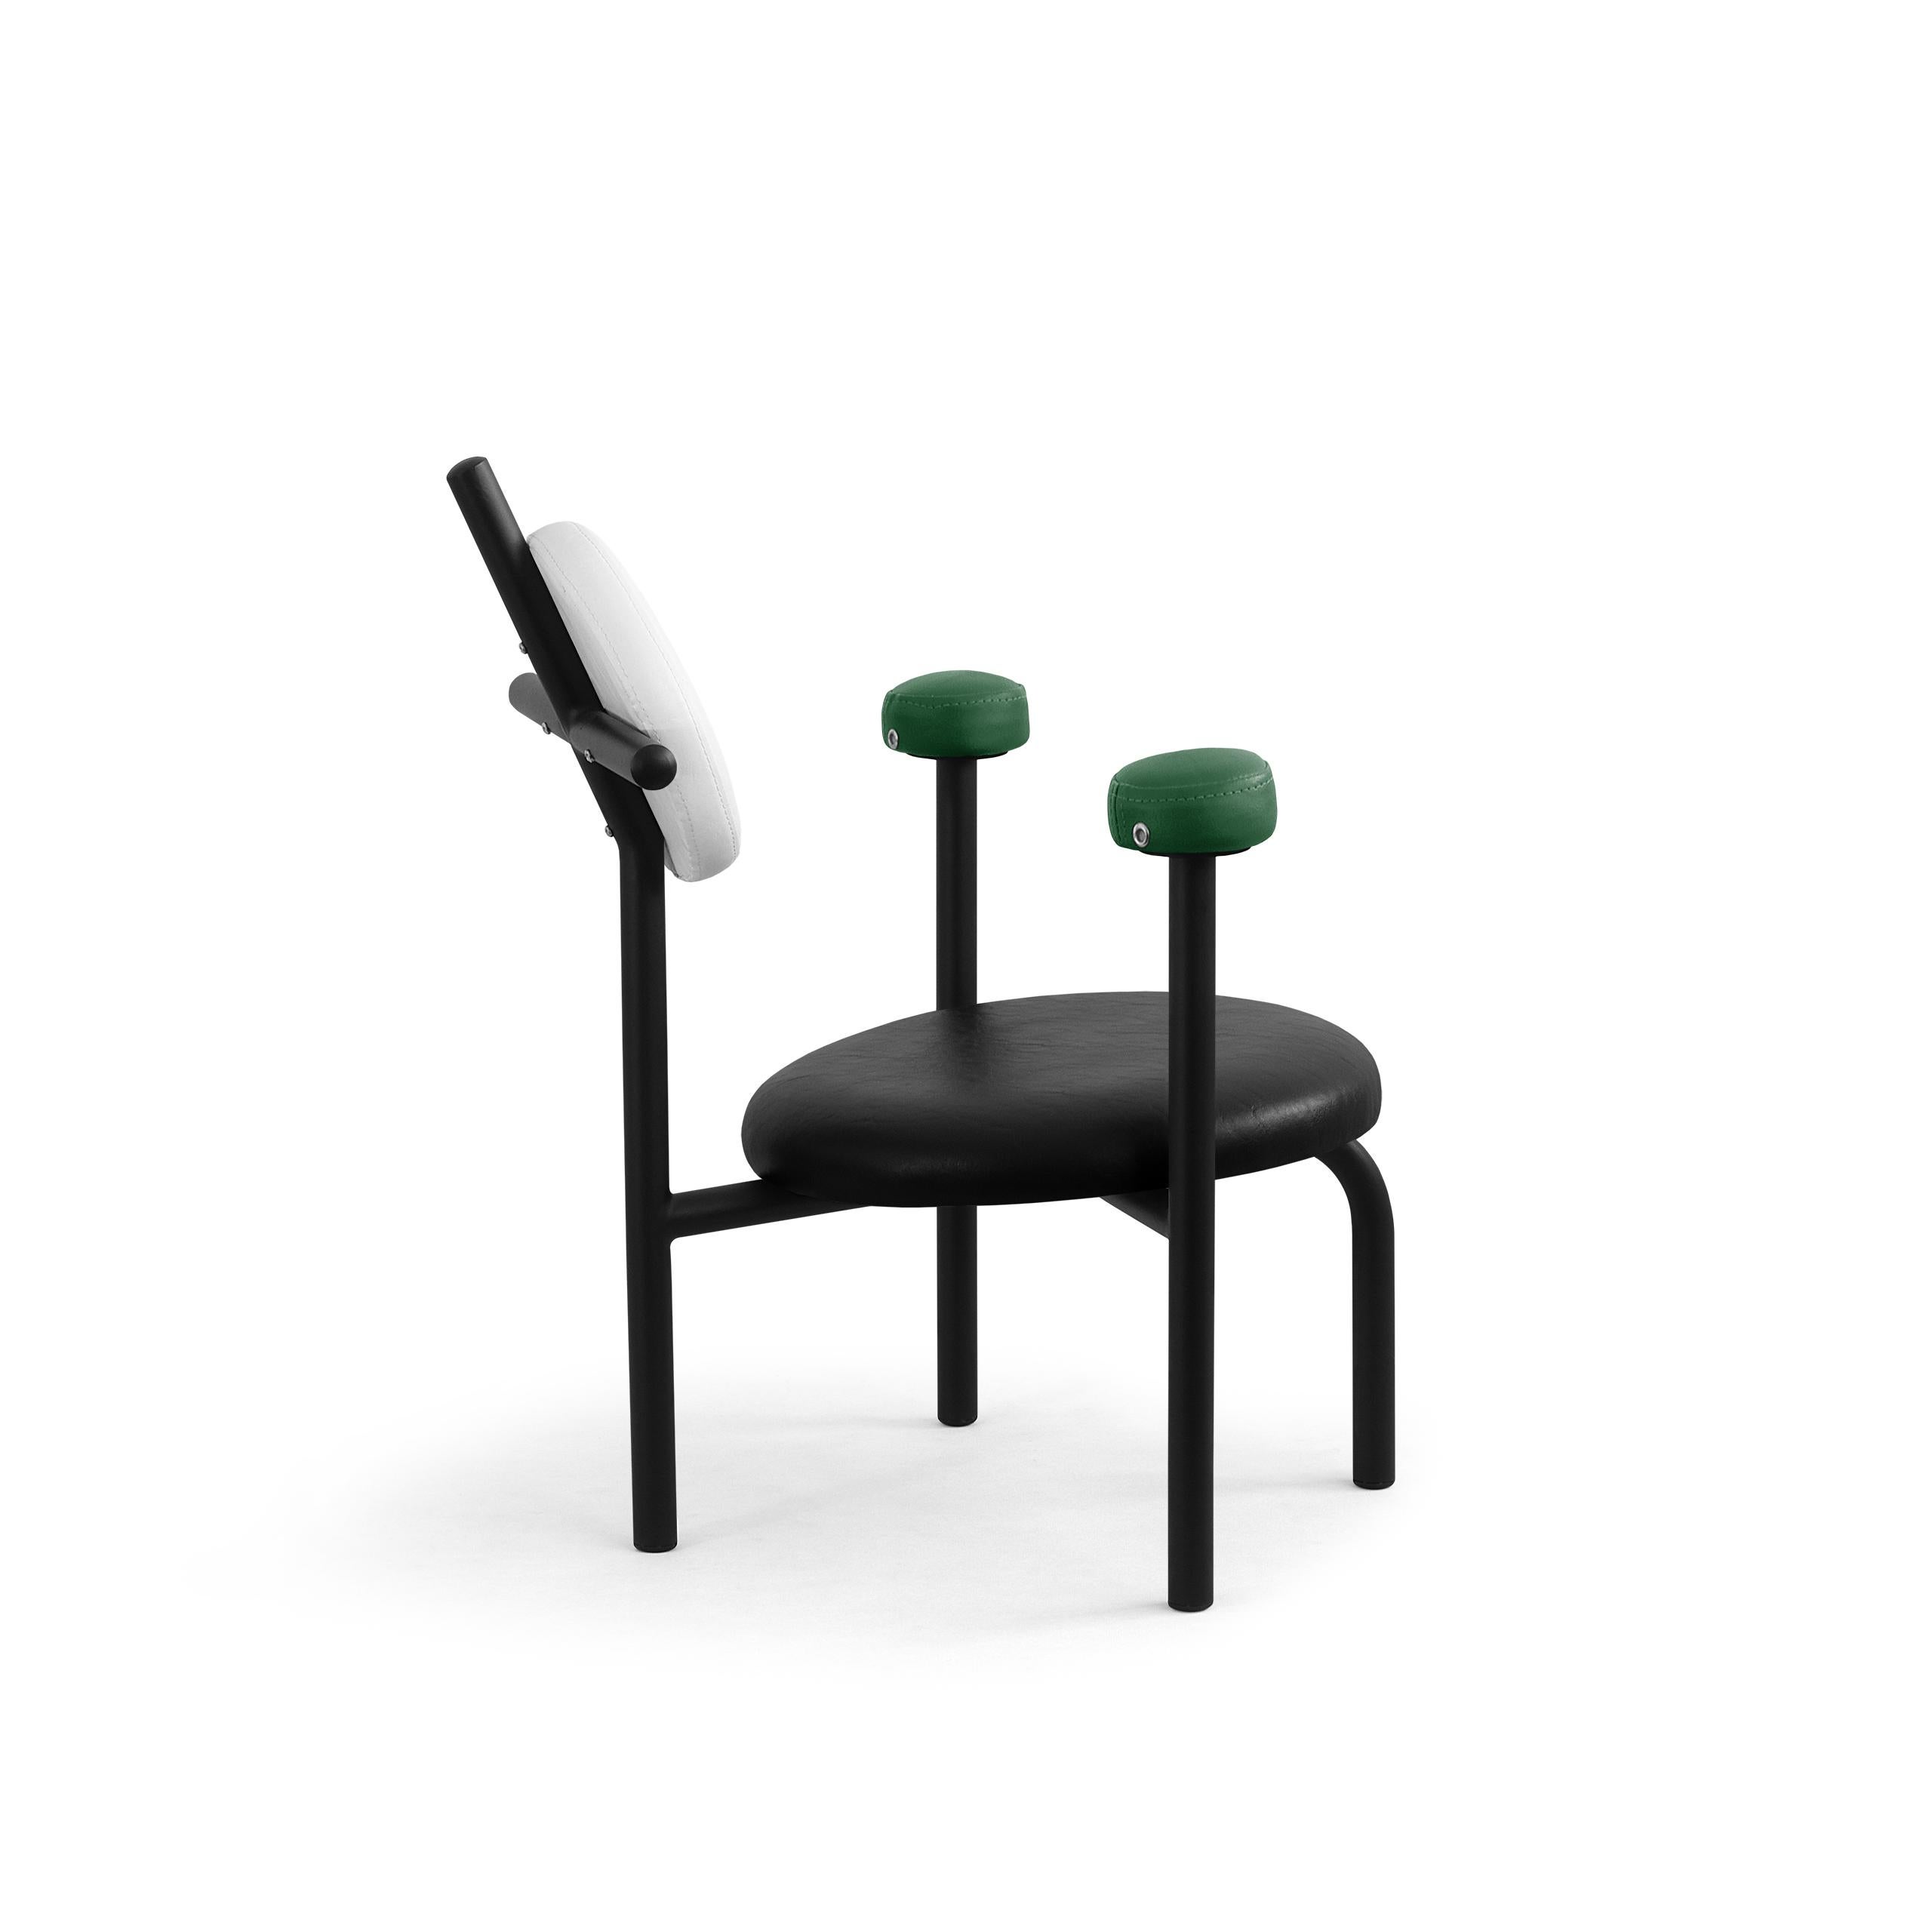 PK18 Impermeable Armchair, Black Seat & Black Metal Structure by Paulo Kobylka In New Condition For Sale In Londrina, Paraná